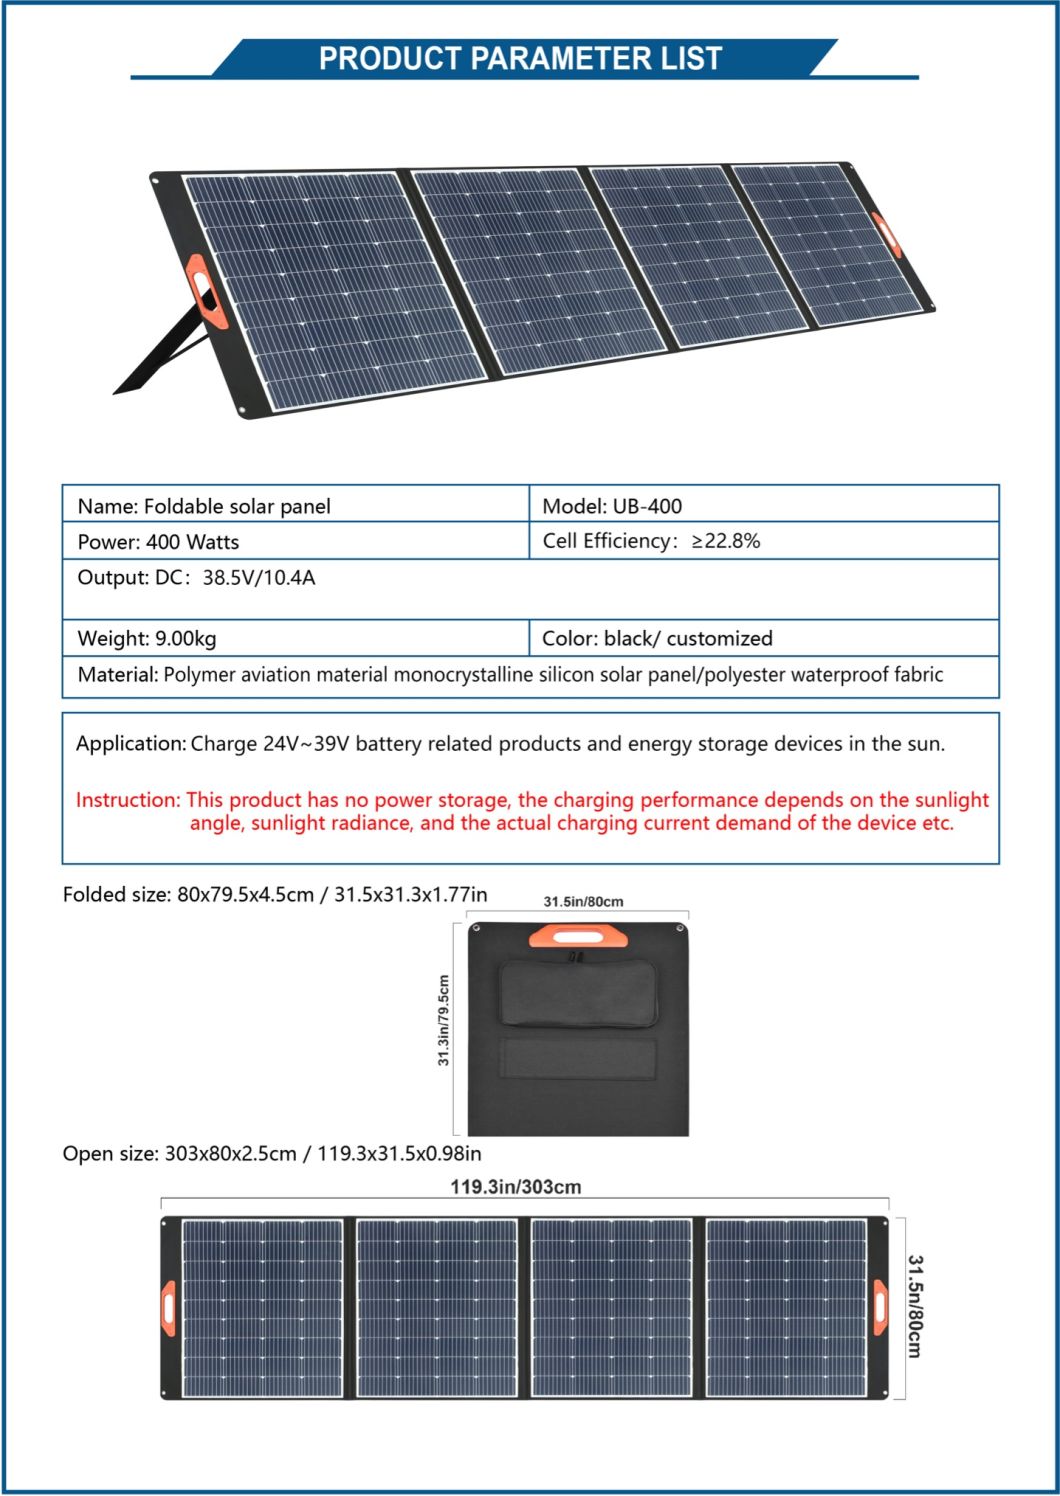 60W 100W 120W 200W 300W 400W Solar Panels High Efficiency Waterproof Design Solar Panels at Competitive Prices.